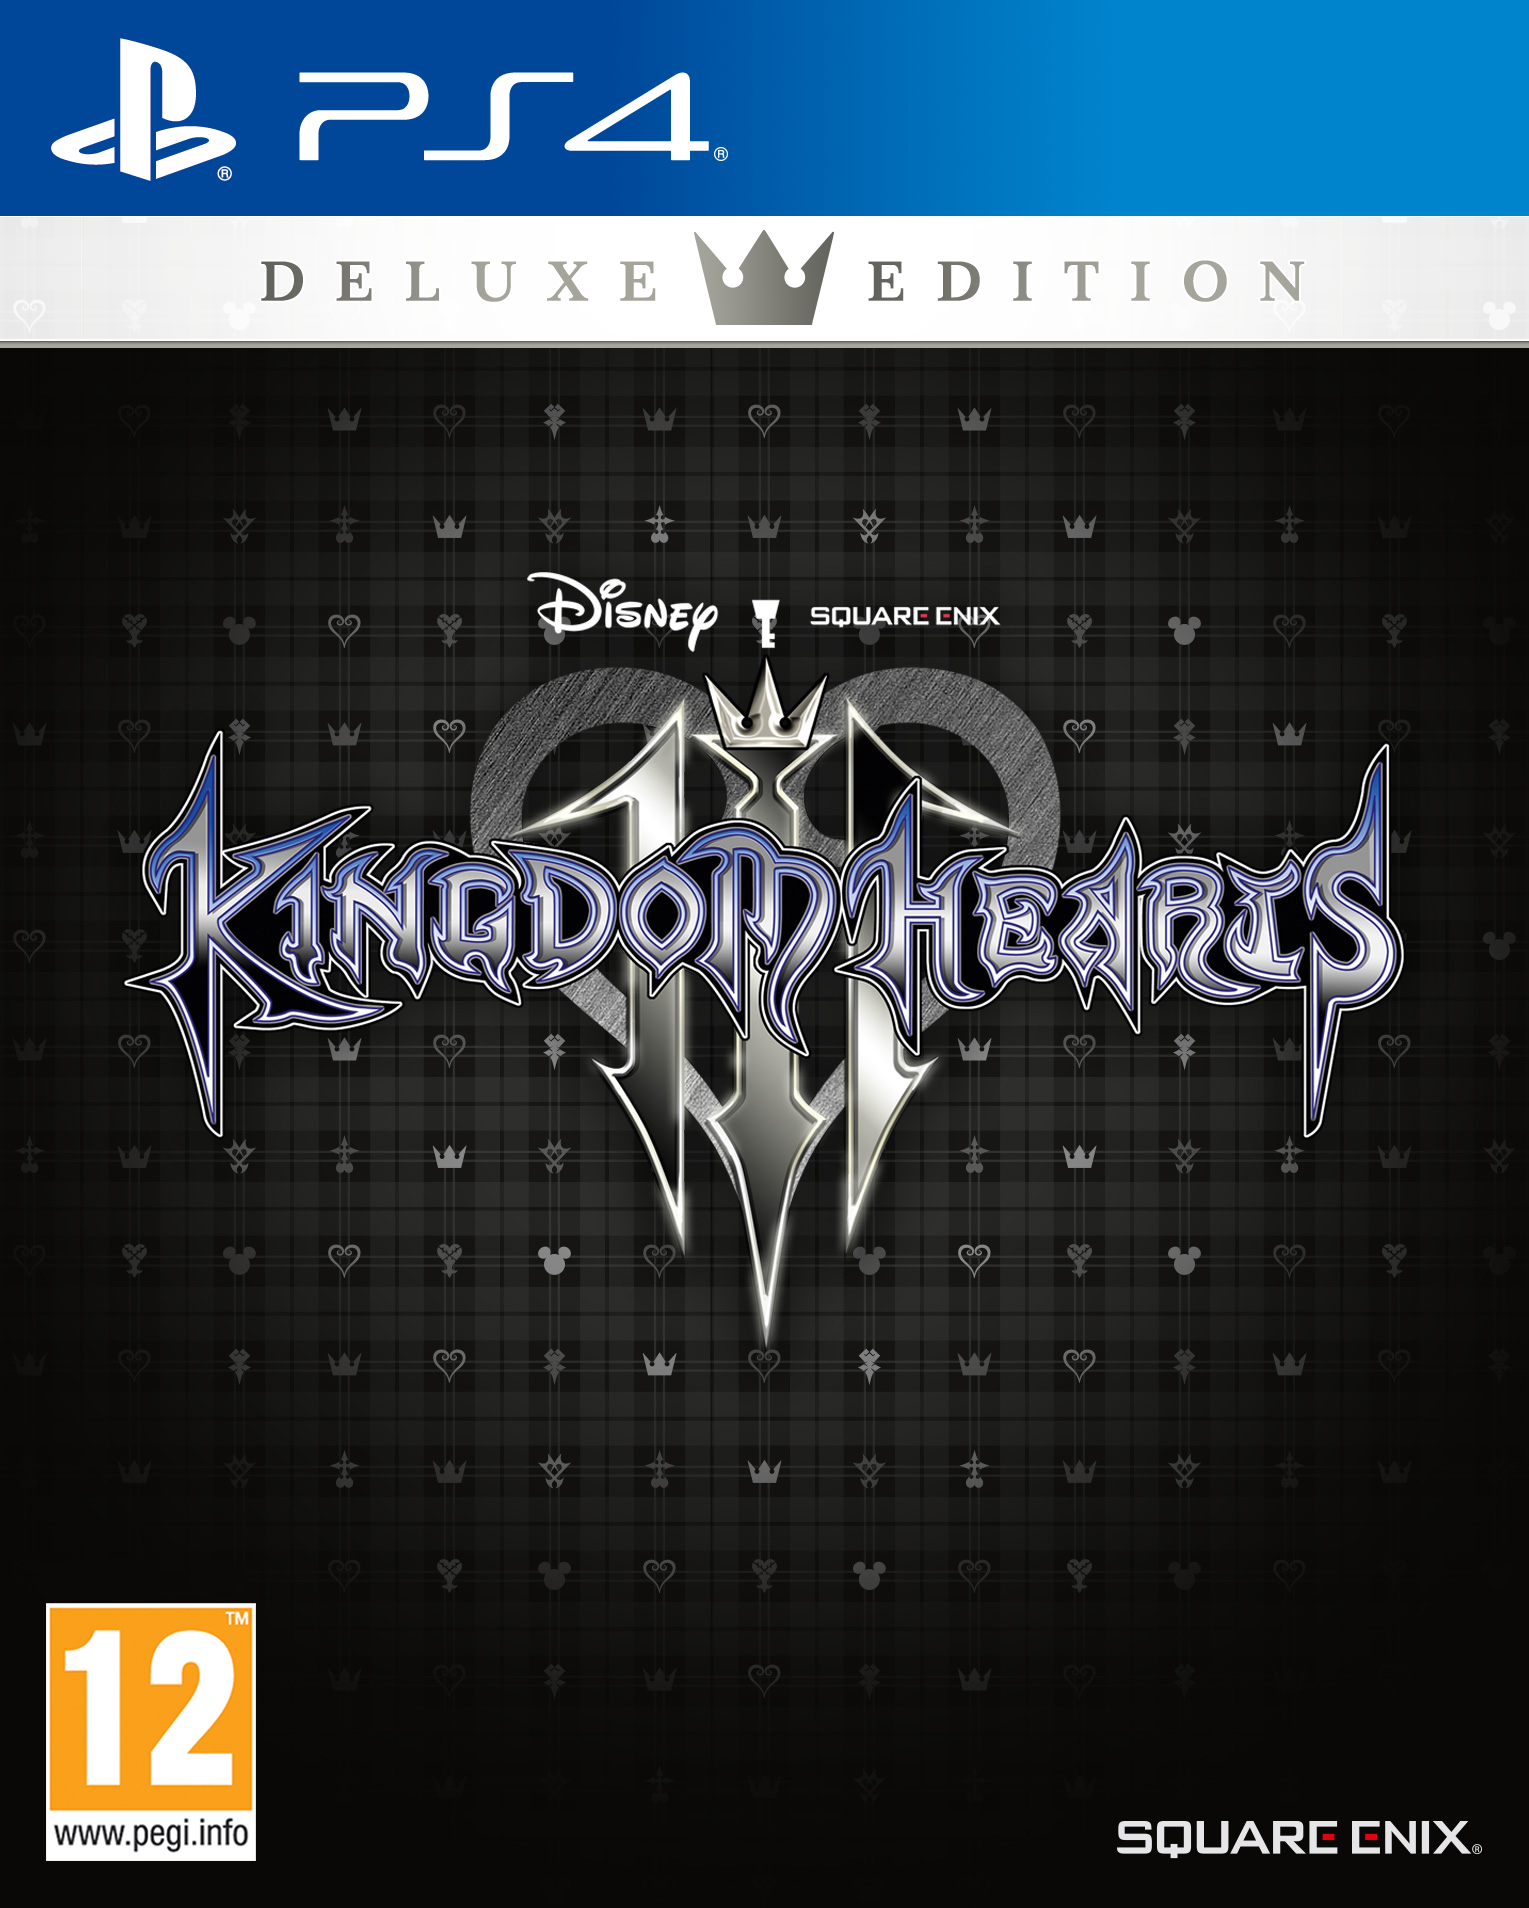 will the standard box art be in kingdom hearts 3 deluxe edition